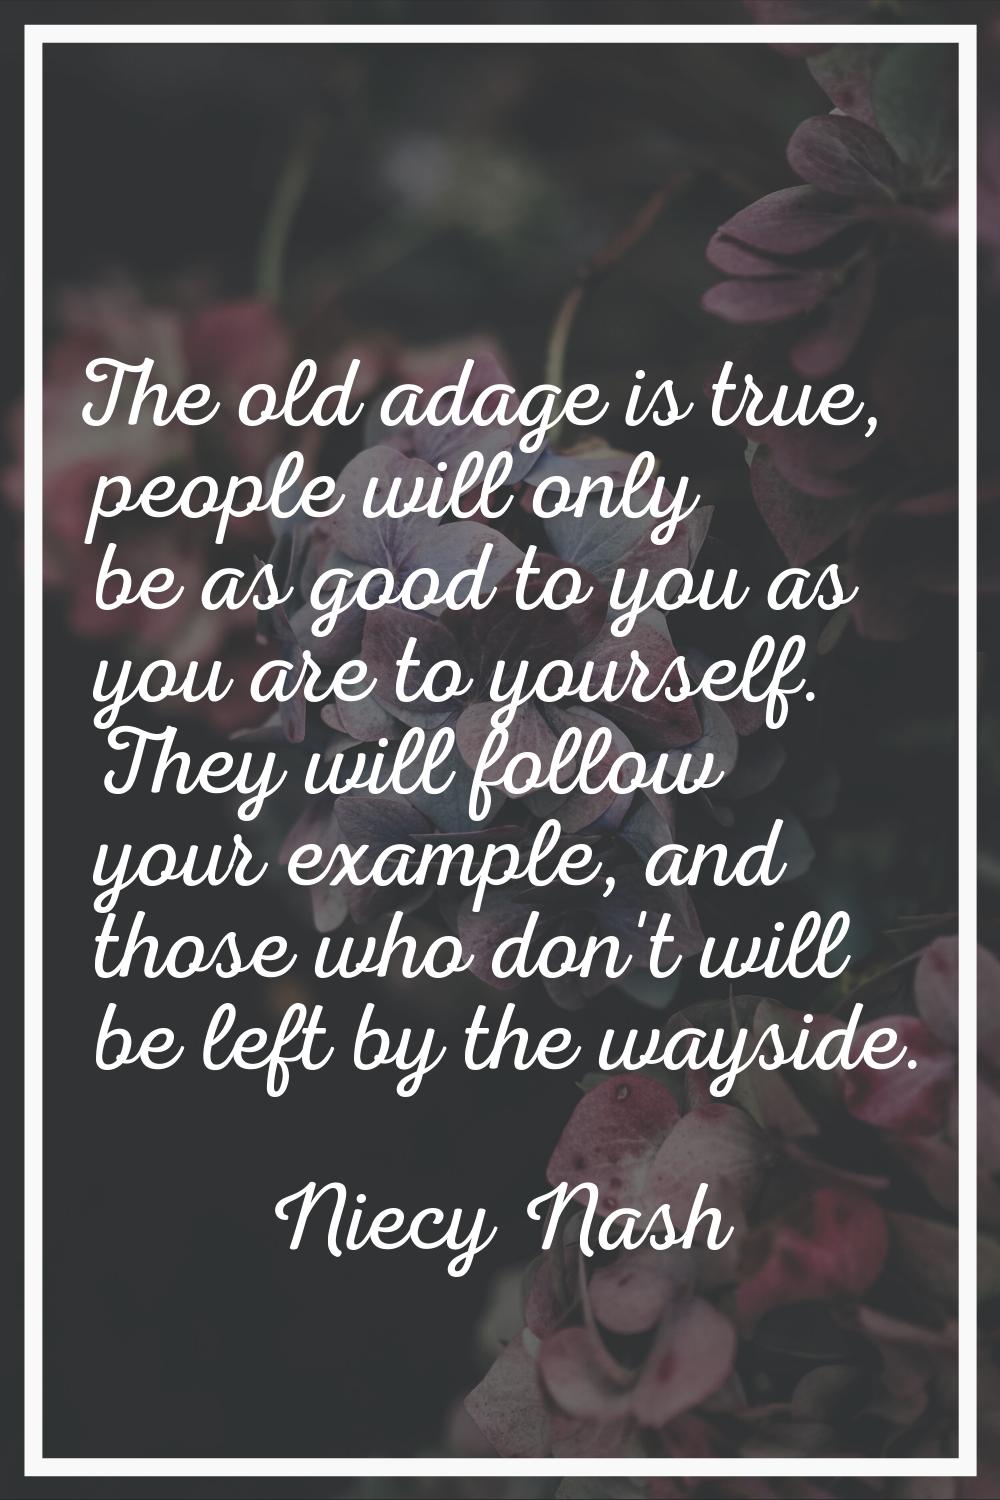 The old adage is true, people will only be as good to you as you are to yourself. They will follow 